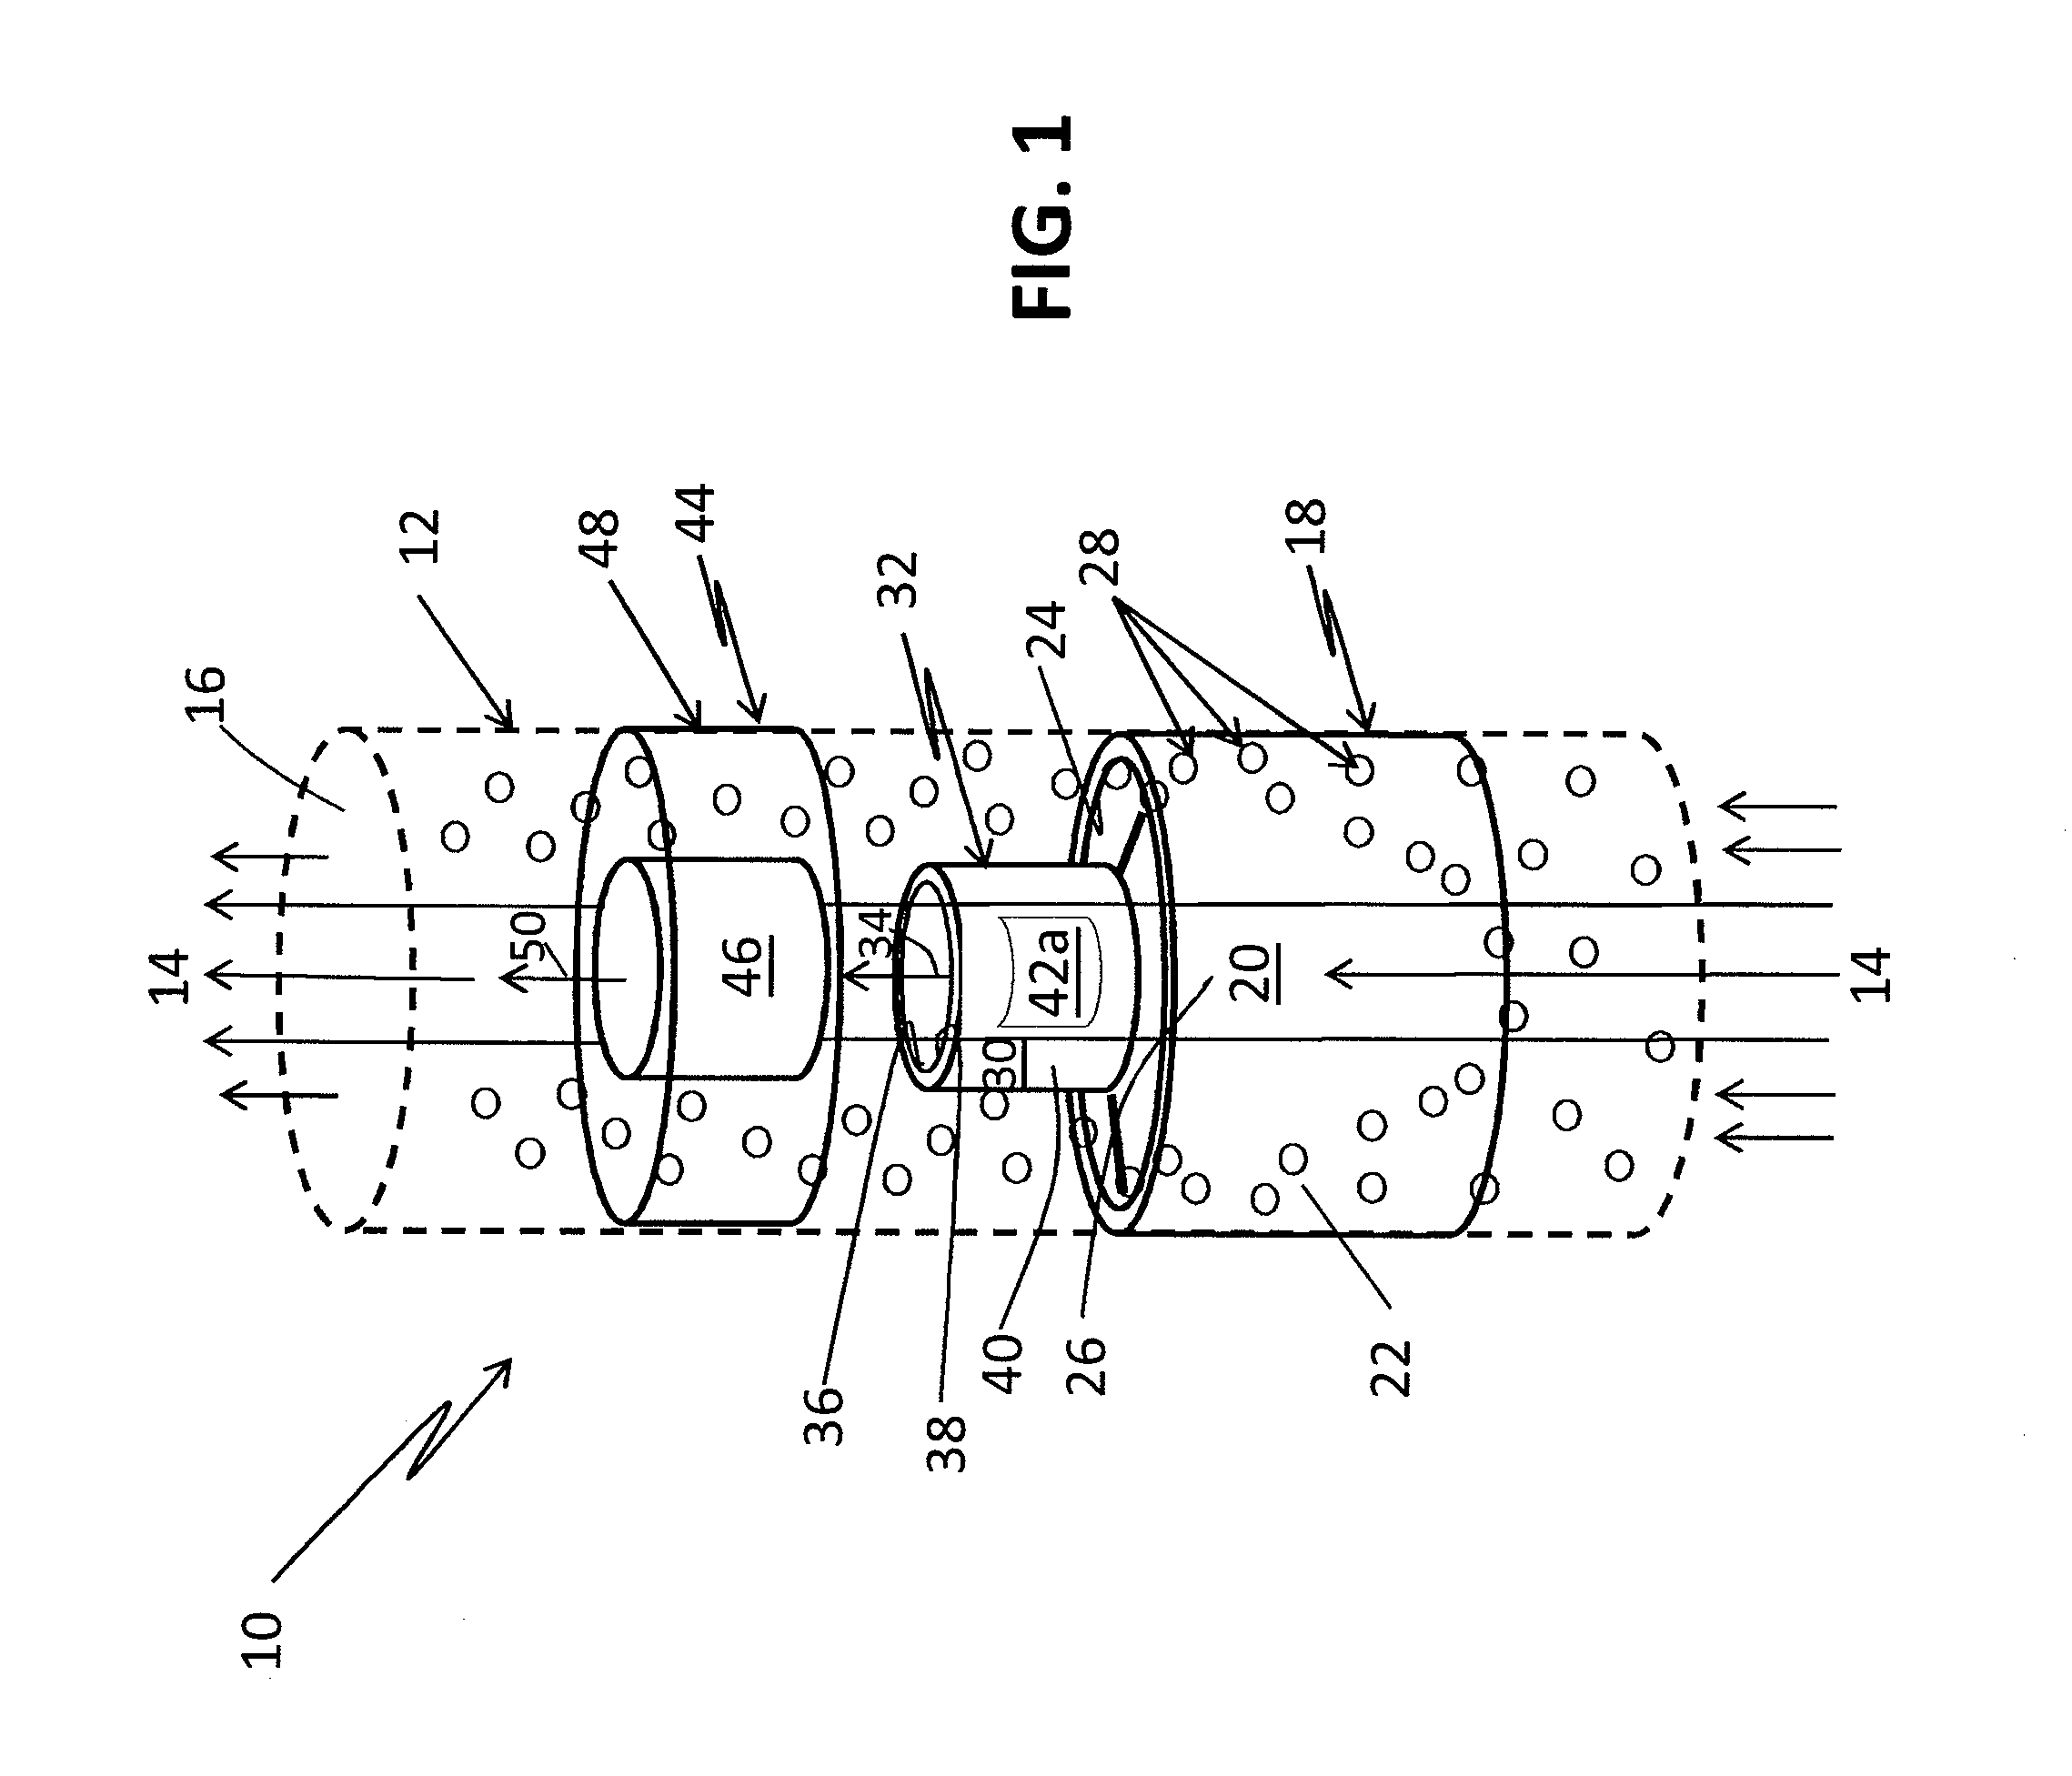 Integrated acoustic phase separator and multiphase fluid composition monitoring apparatus and method